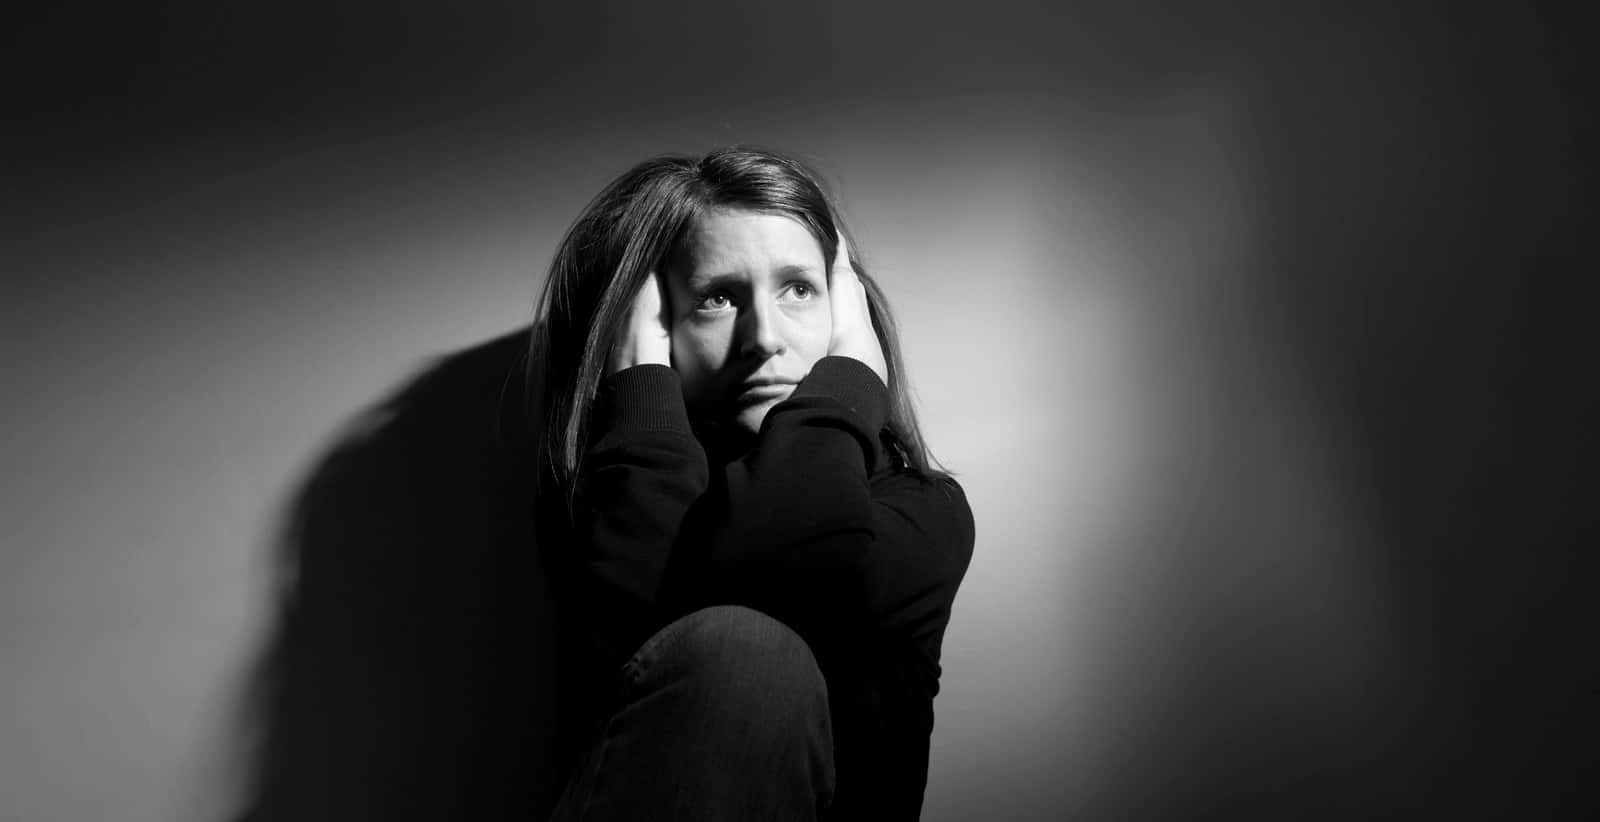 314 Depressed Profile Photos, Pictures And Background Images For